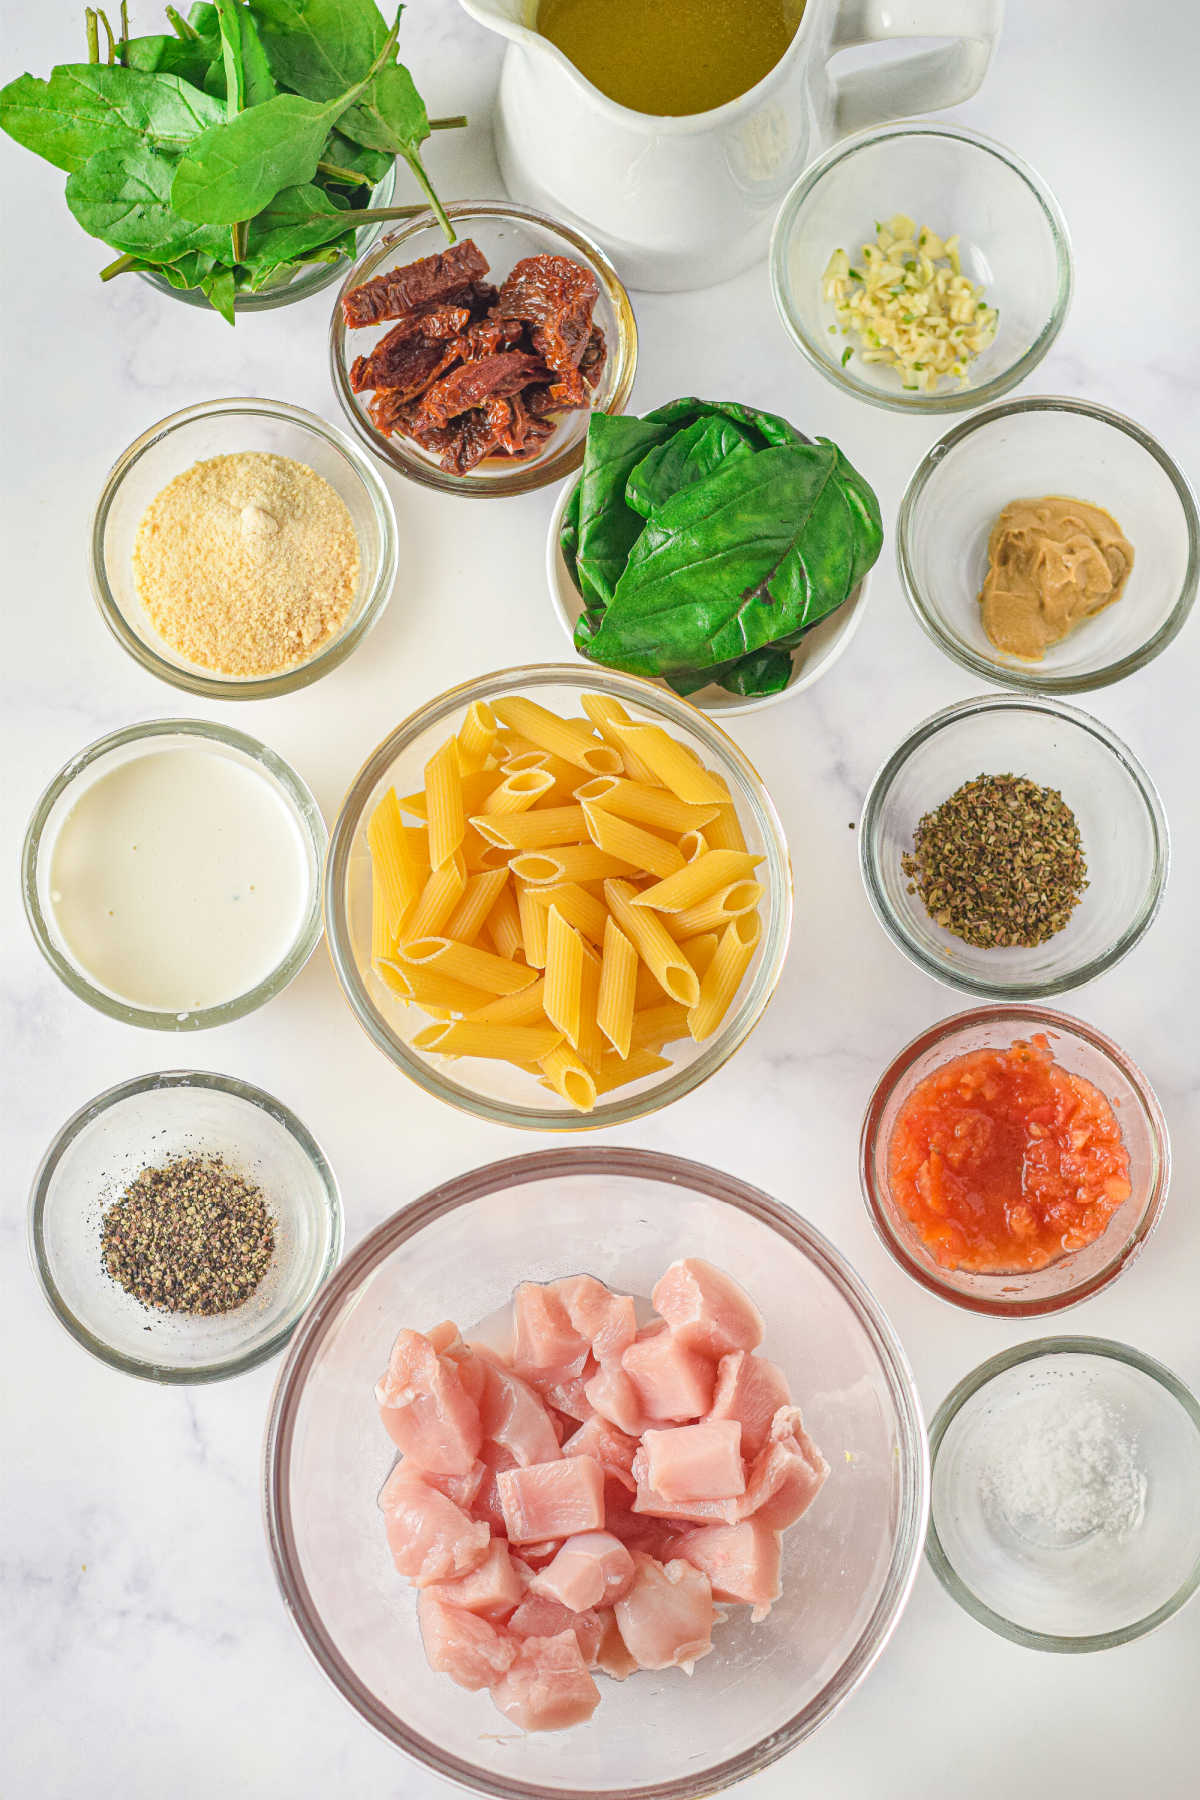 Ingredients including chicken, pasta, spinach, cheese, sun dried tomatoes, chream and spices ready to be made into creamy tuscan chicken pasta.